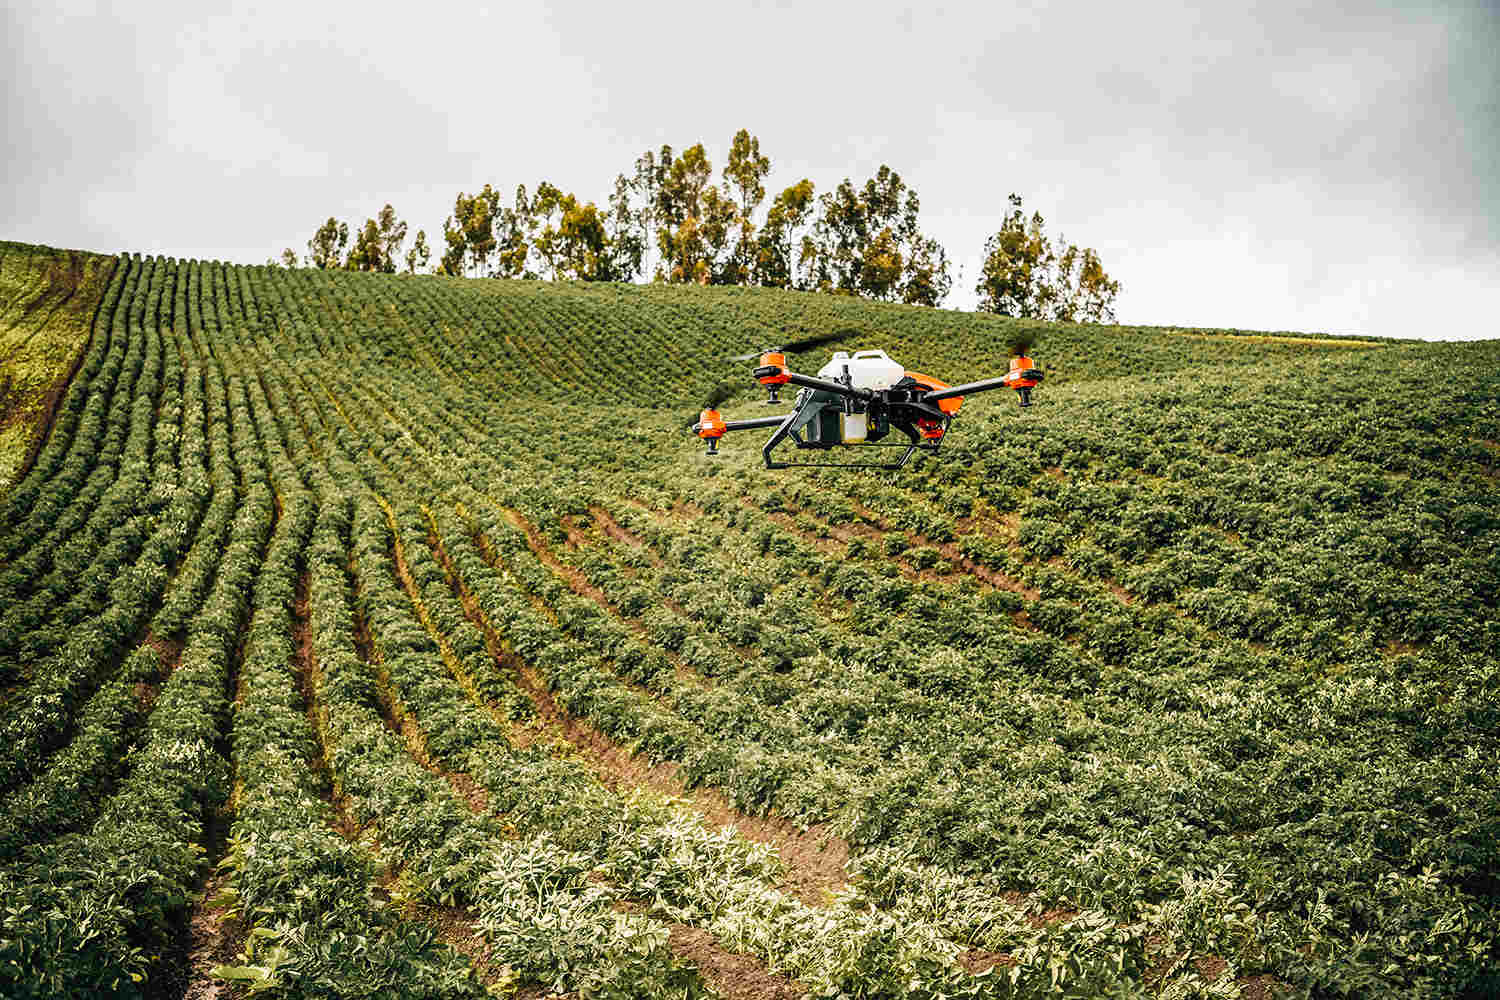 The agricultural drone can be a sustainable solution to the Ecuadorian farmers